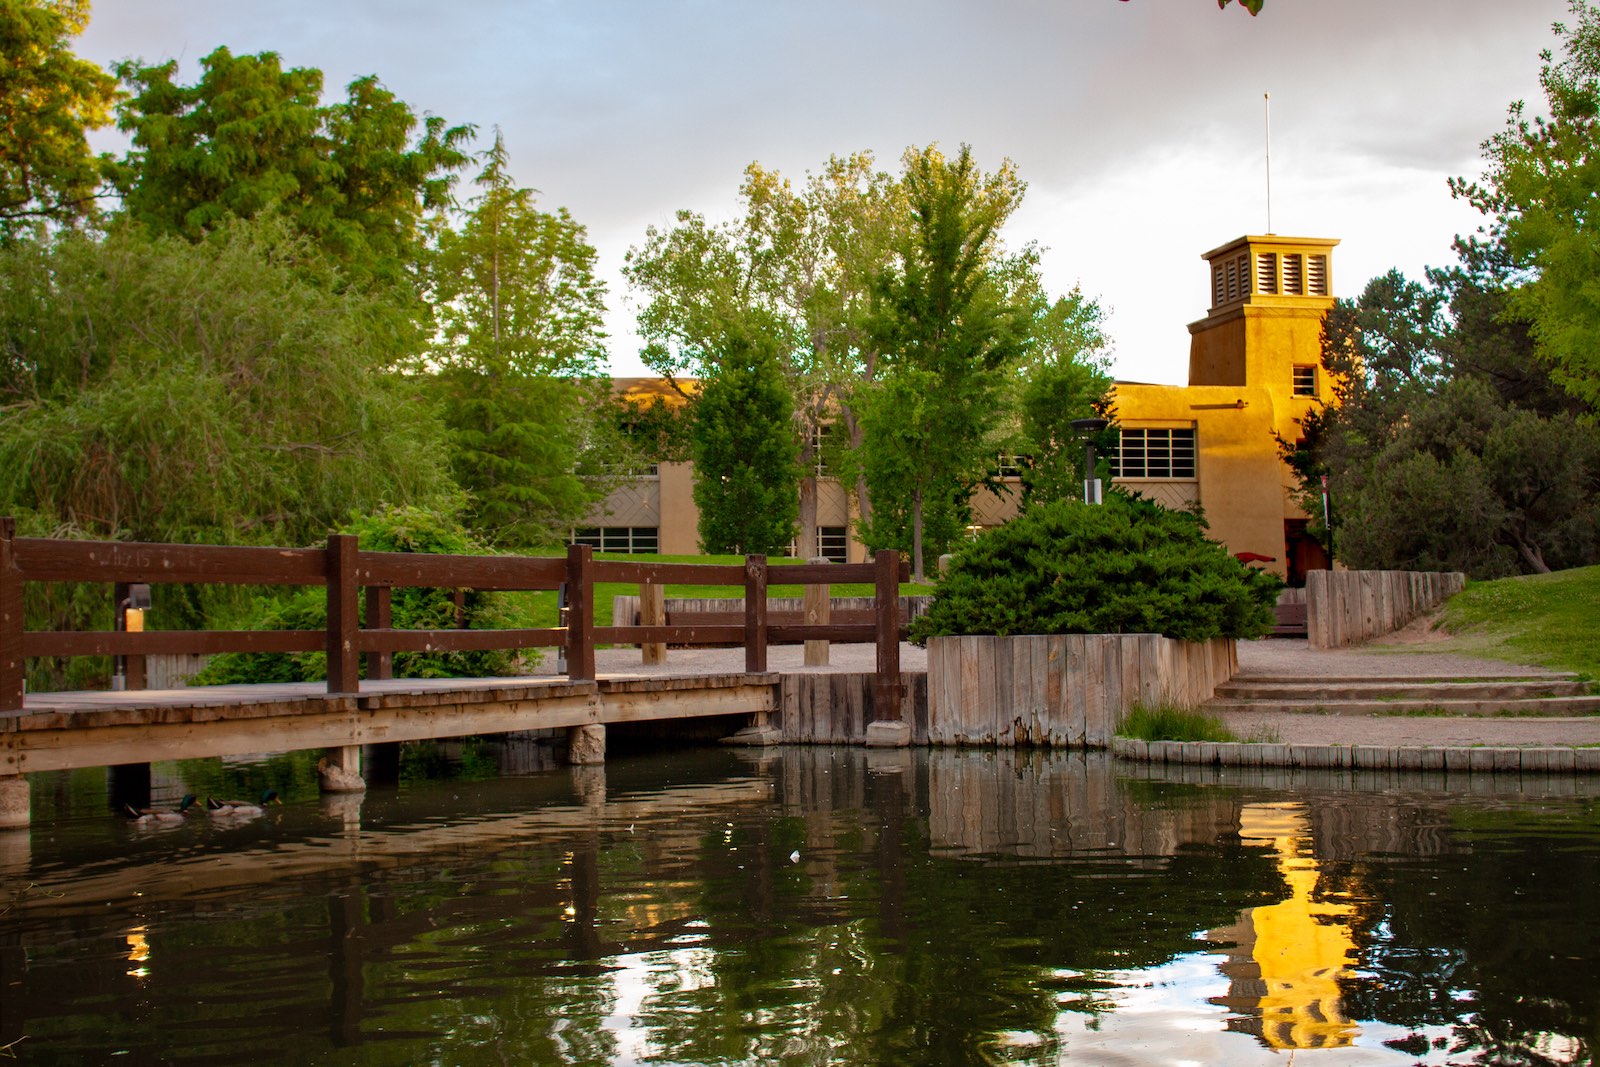 Pond on the campus of the University of New Mexico